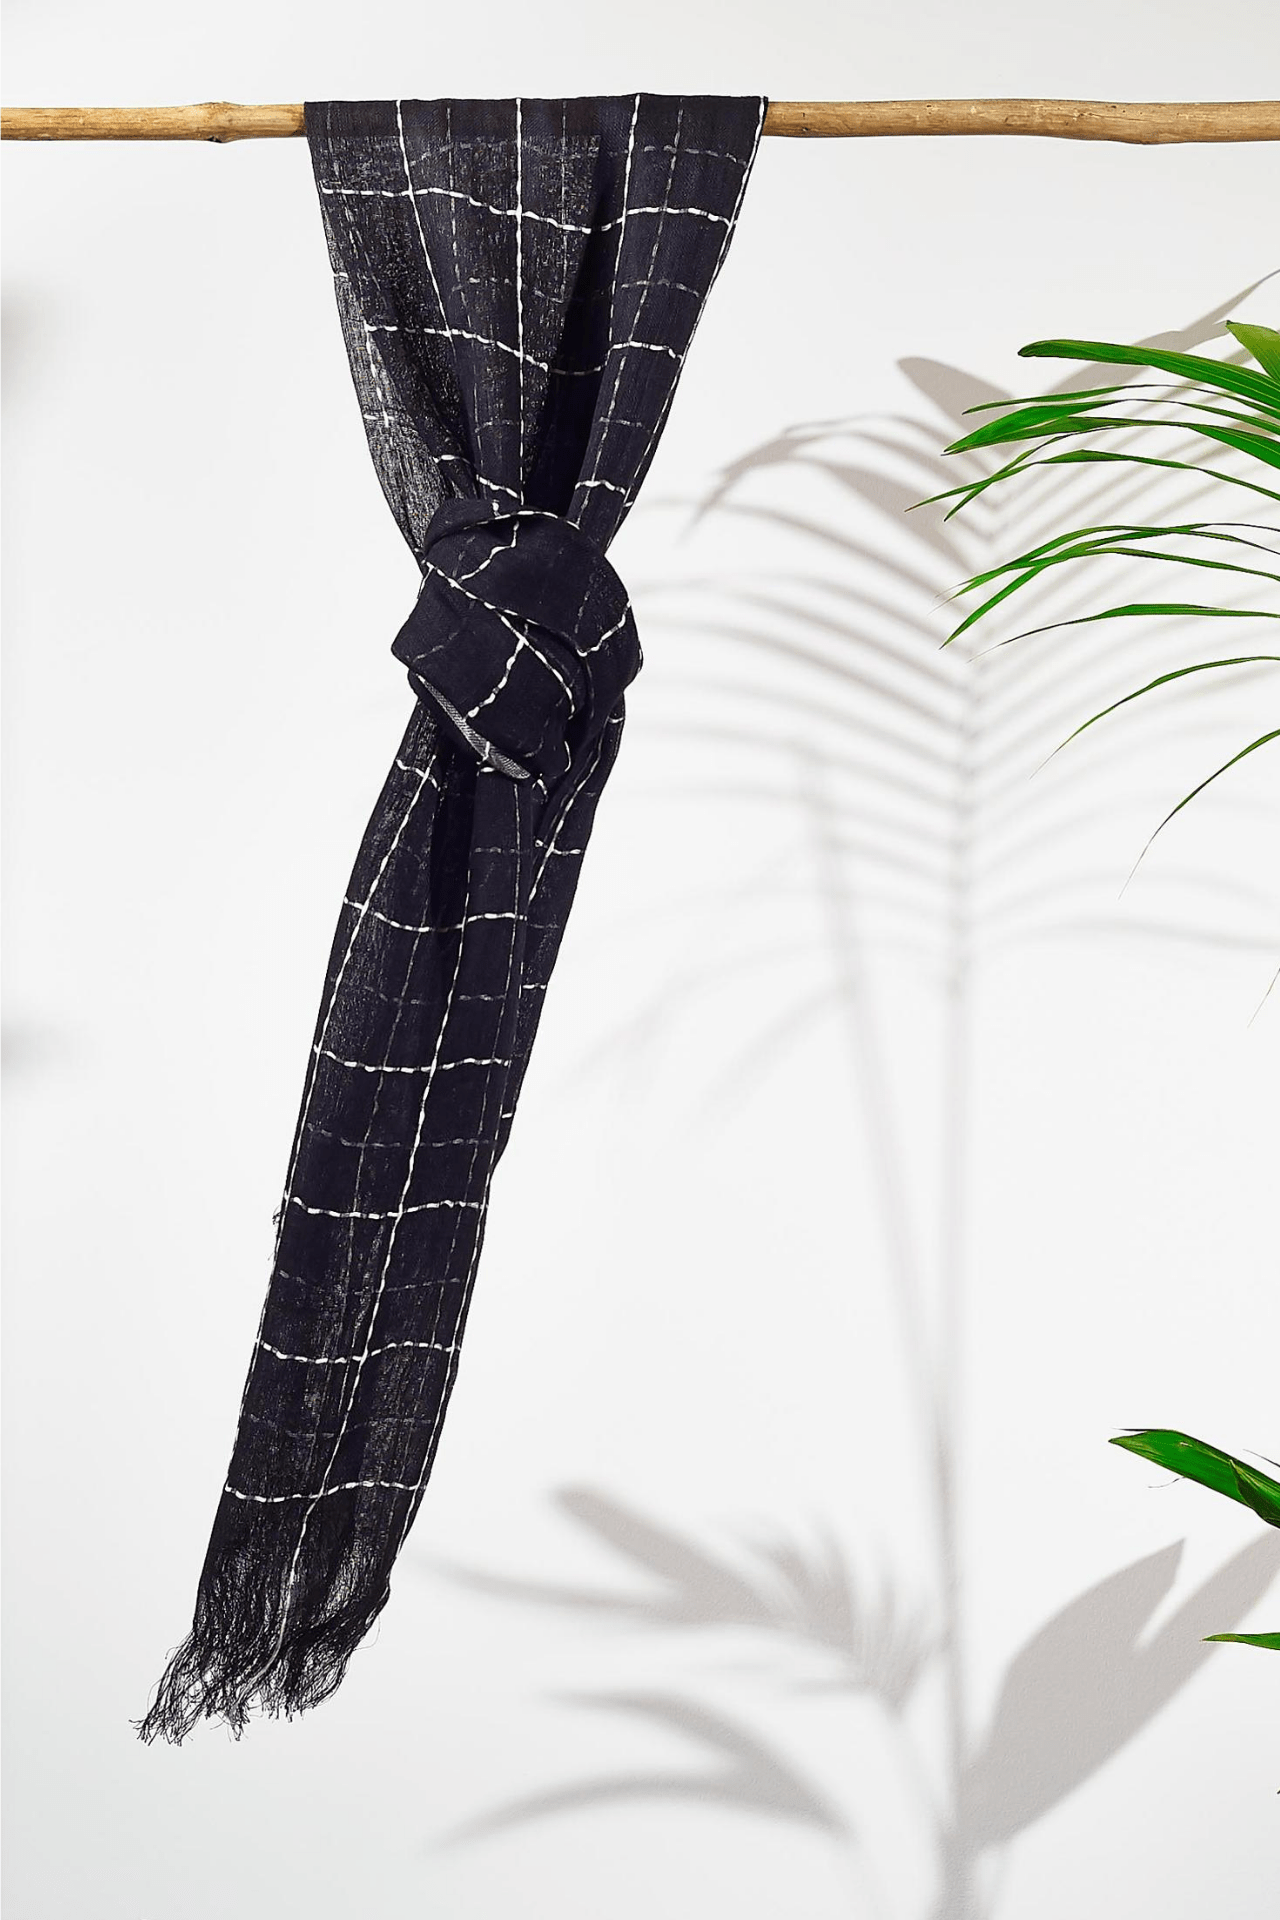 black linen scarf tied in a knot over a natural wooden rod on a white background next to a plant. Showing a different way you could tie the scarf around your neck as opposed to just draping it.